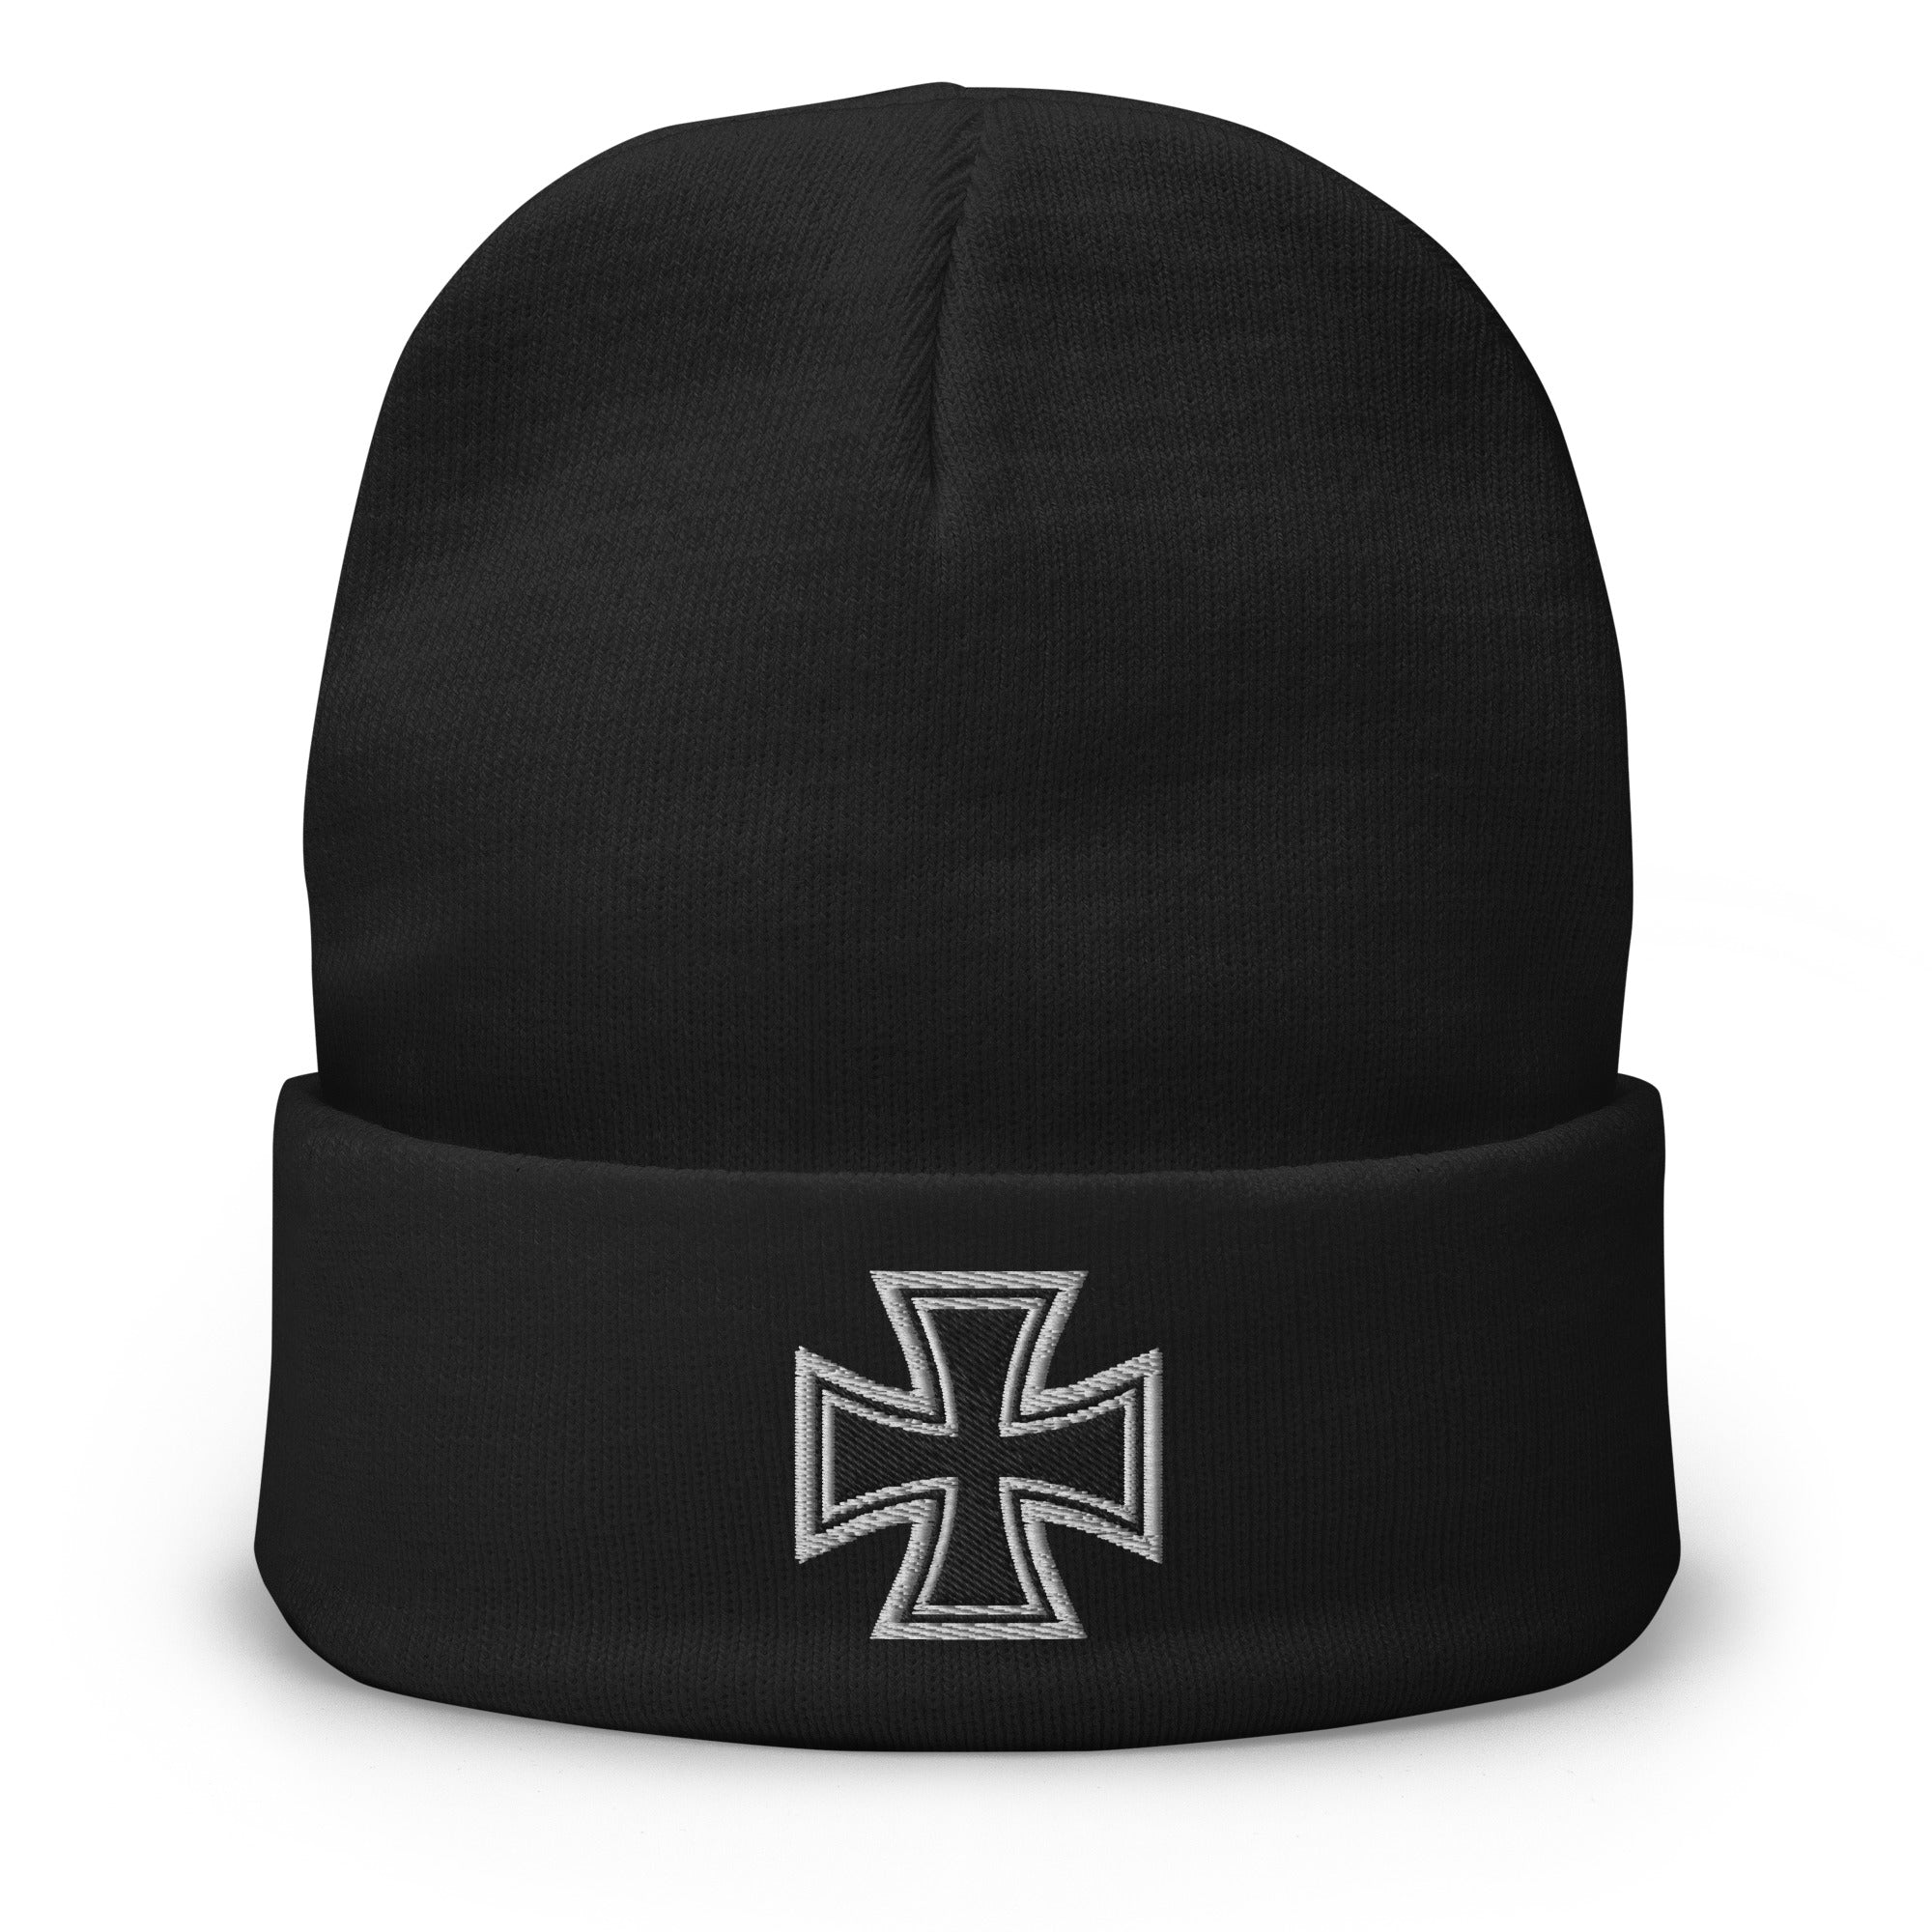 Iron Cross Occult Symbol World War II Style Embroidered Cuff Beanie - Edge of Life Designs